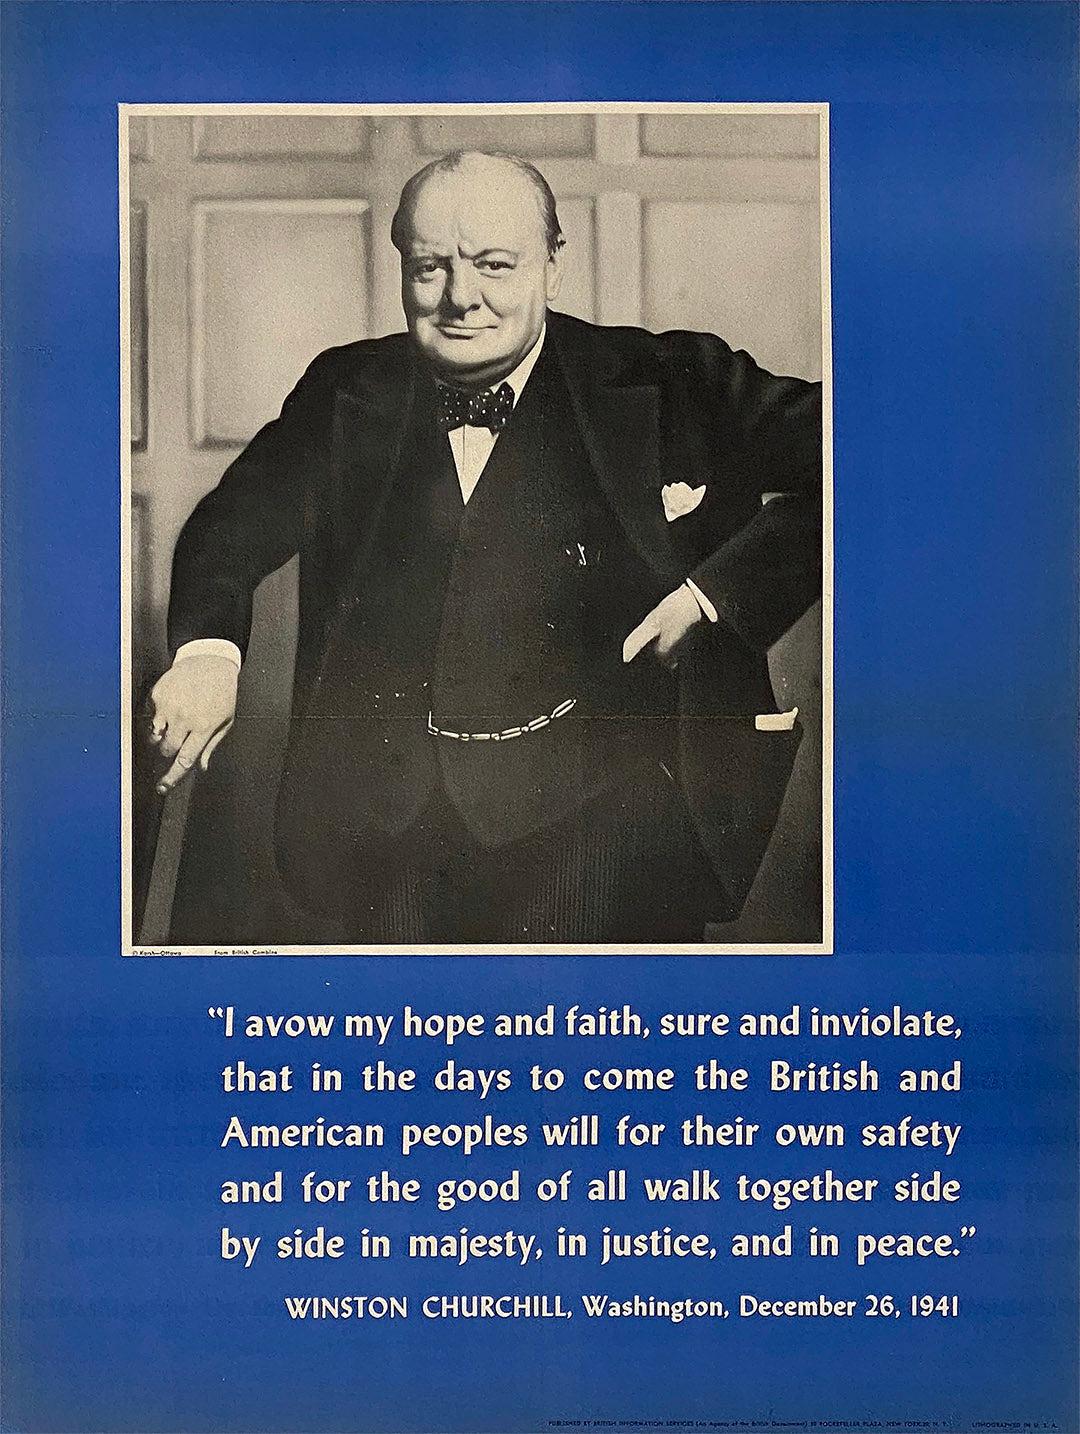 Winston Churchill Original Vintage WWII Poster - I Avow My Hope and Faith c1945